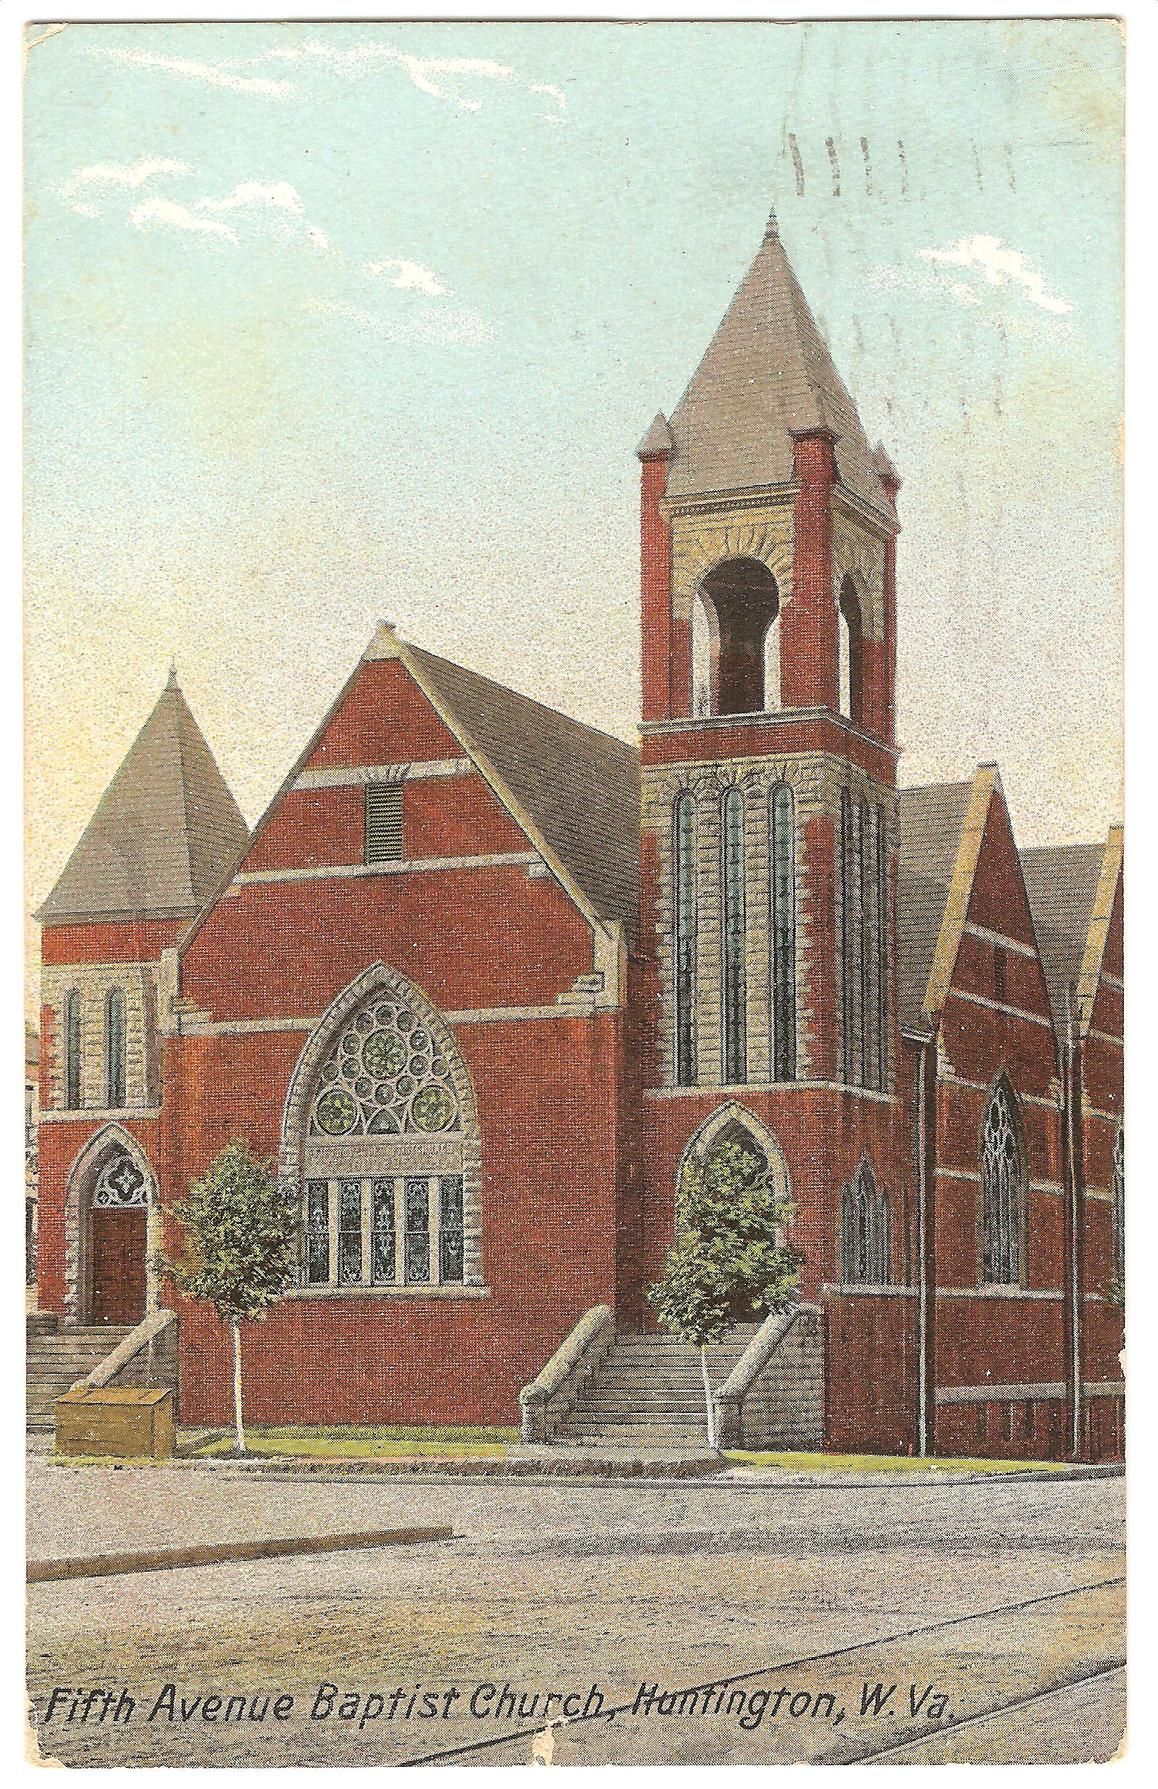 The first established location of Fifth Avenue Baptist Church- this structure was torn down, and the Herald Dispatch offices now sit on this property.